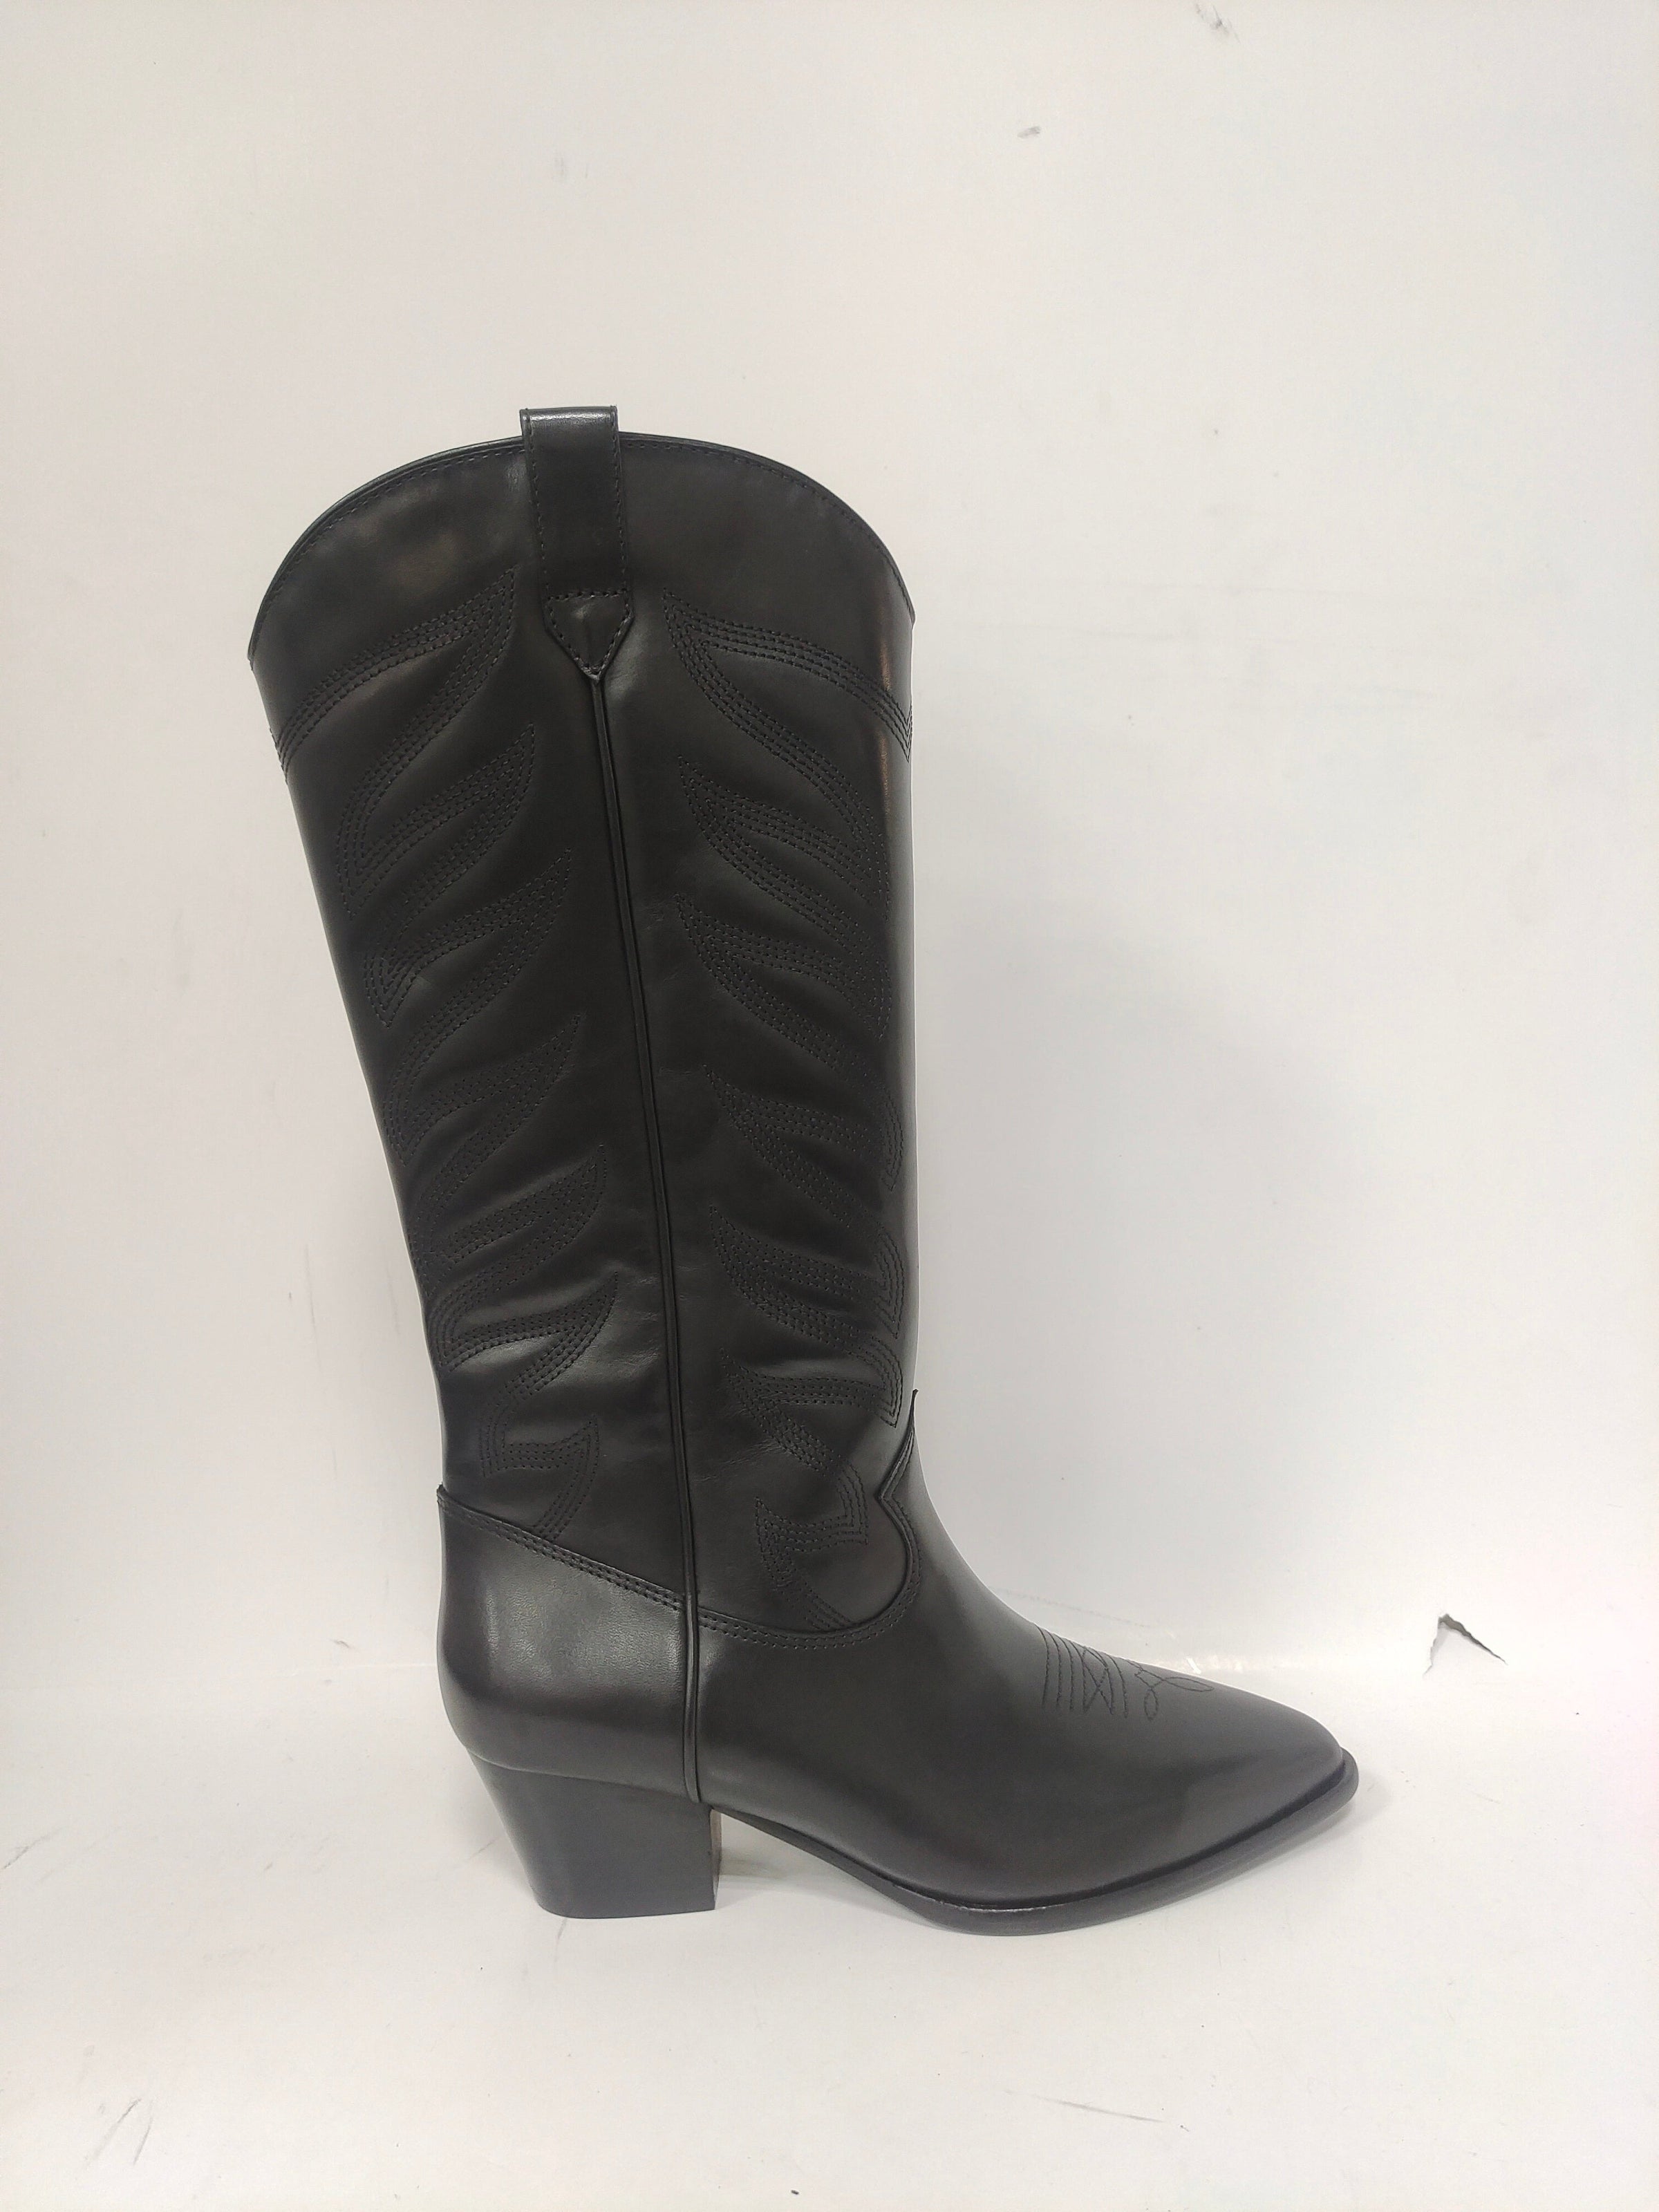 Tall black cowboy boots with quilted details on the shaft